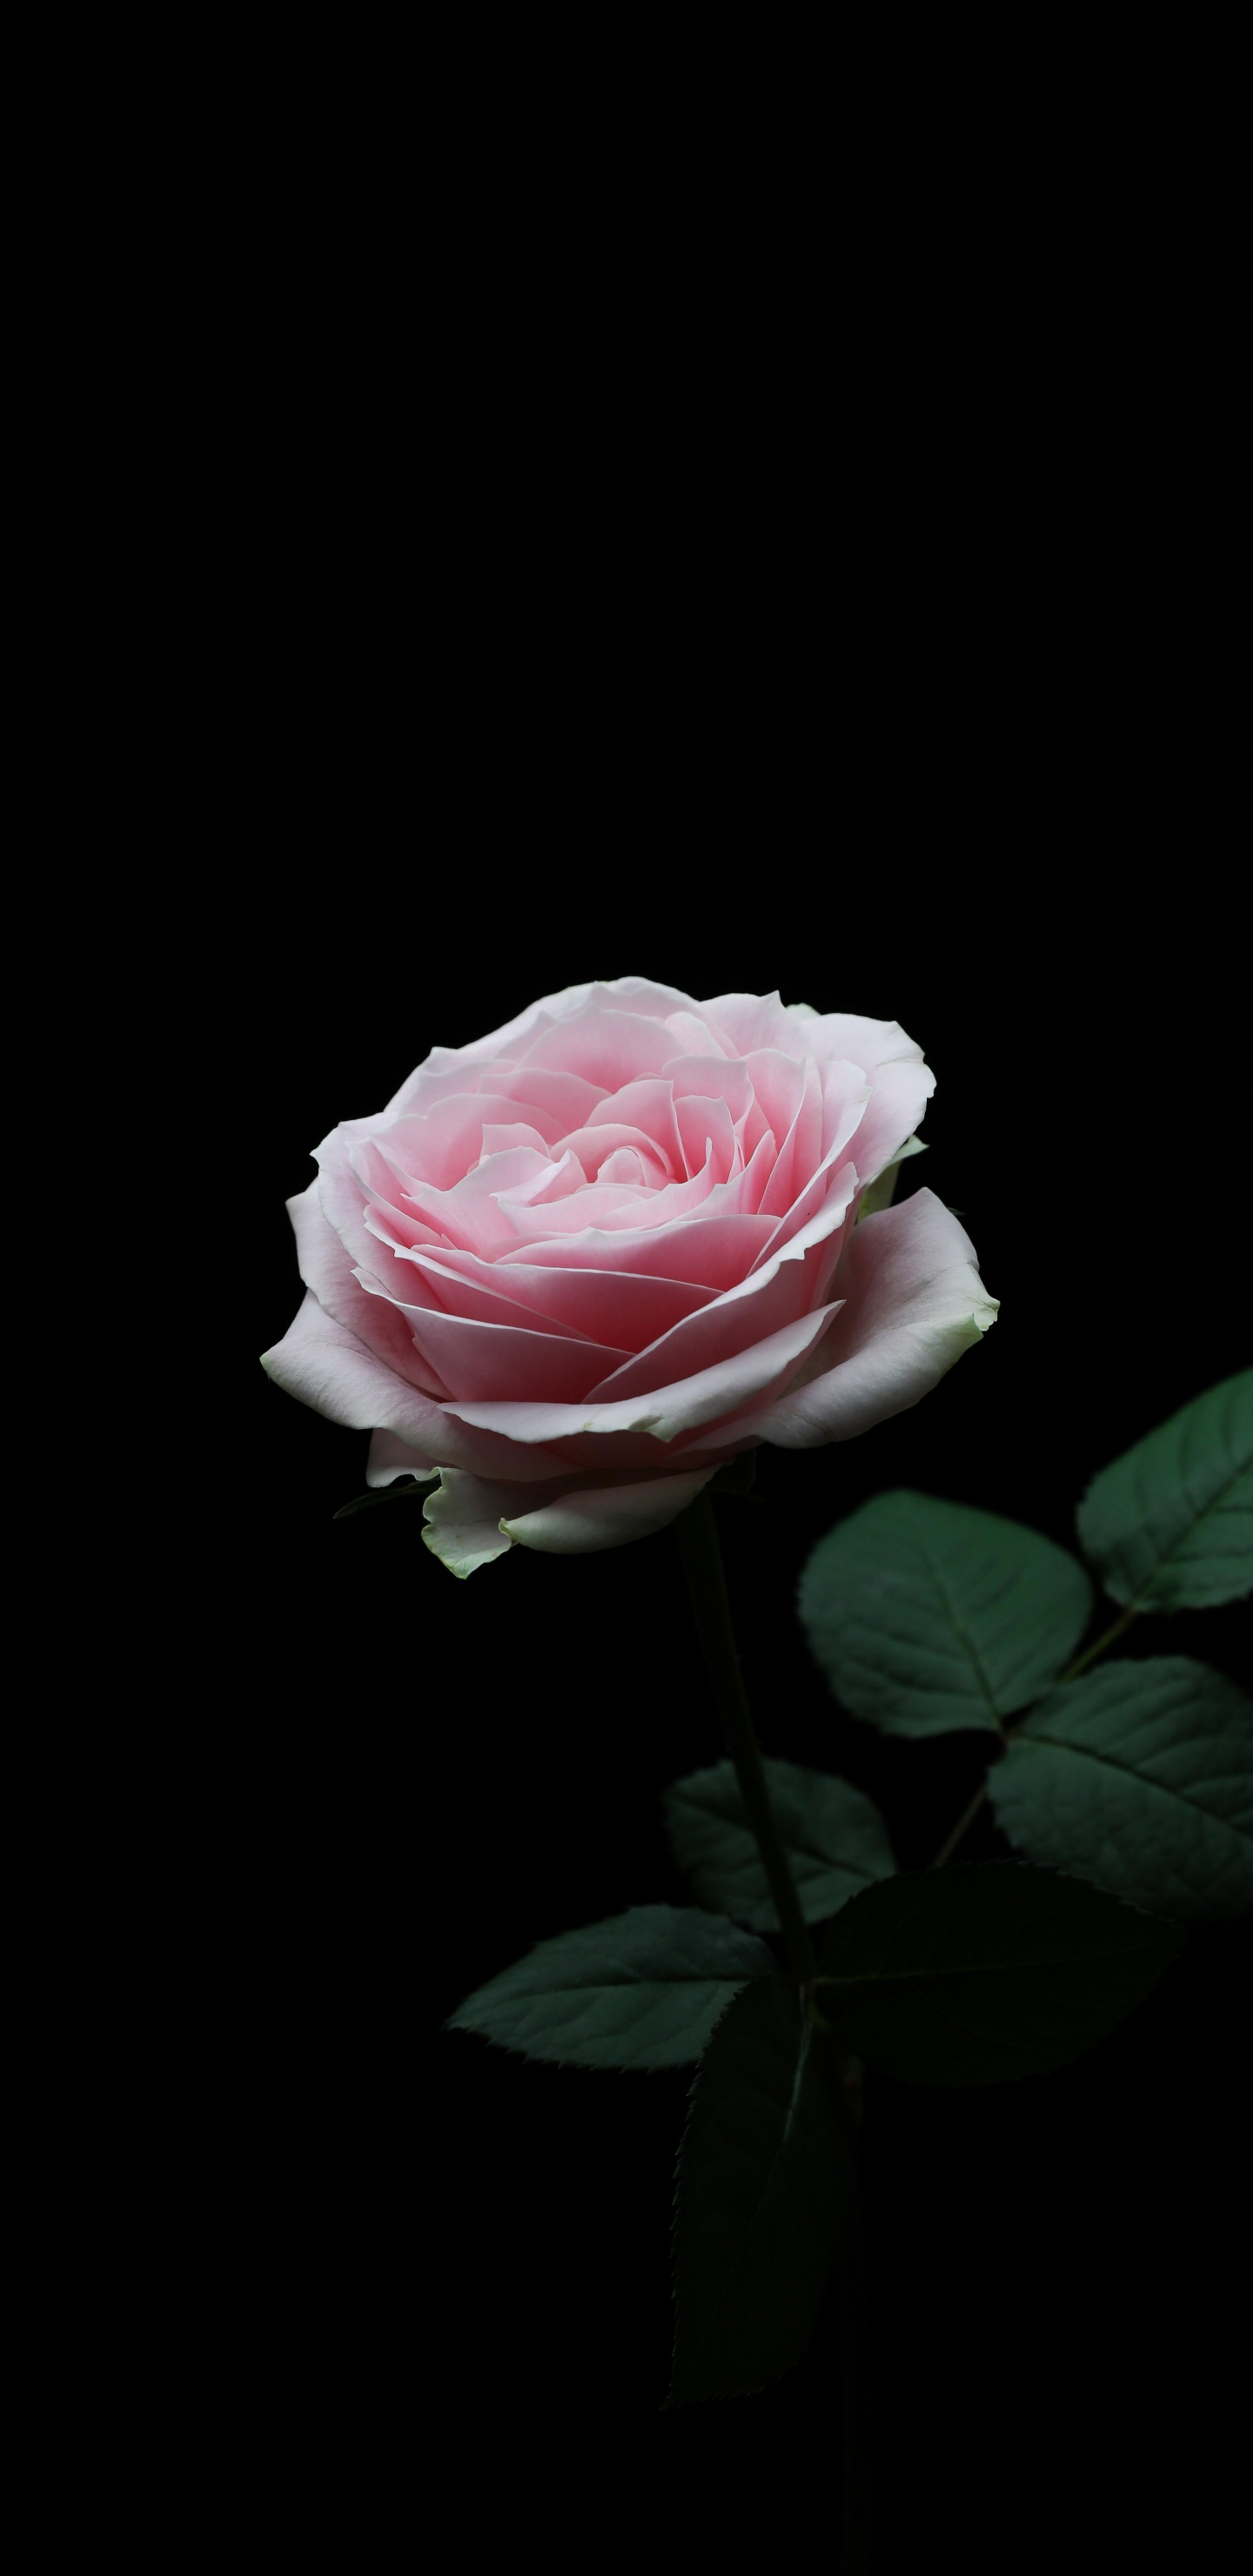 Pink Rose in Bloom With Black Background. Wallpaper in 1440x2960 Resolution